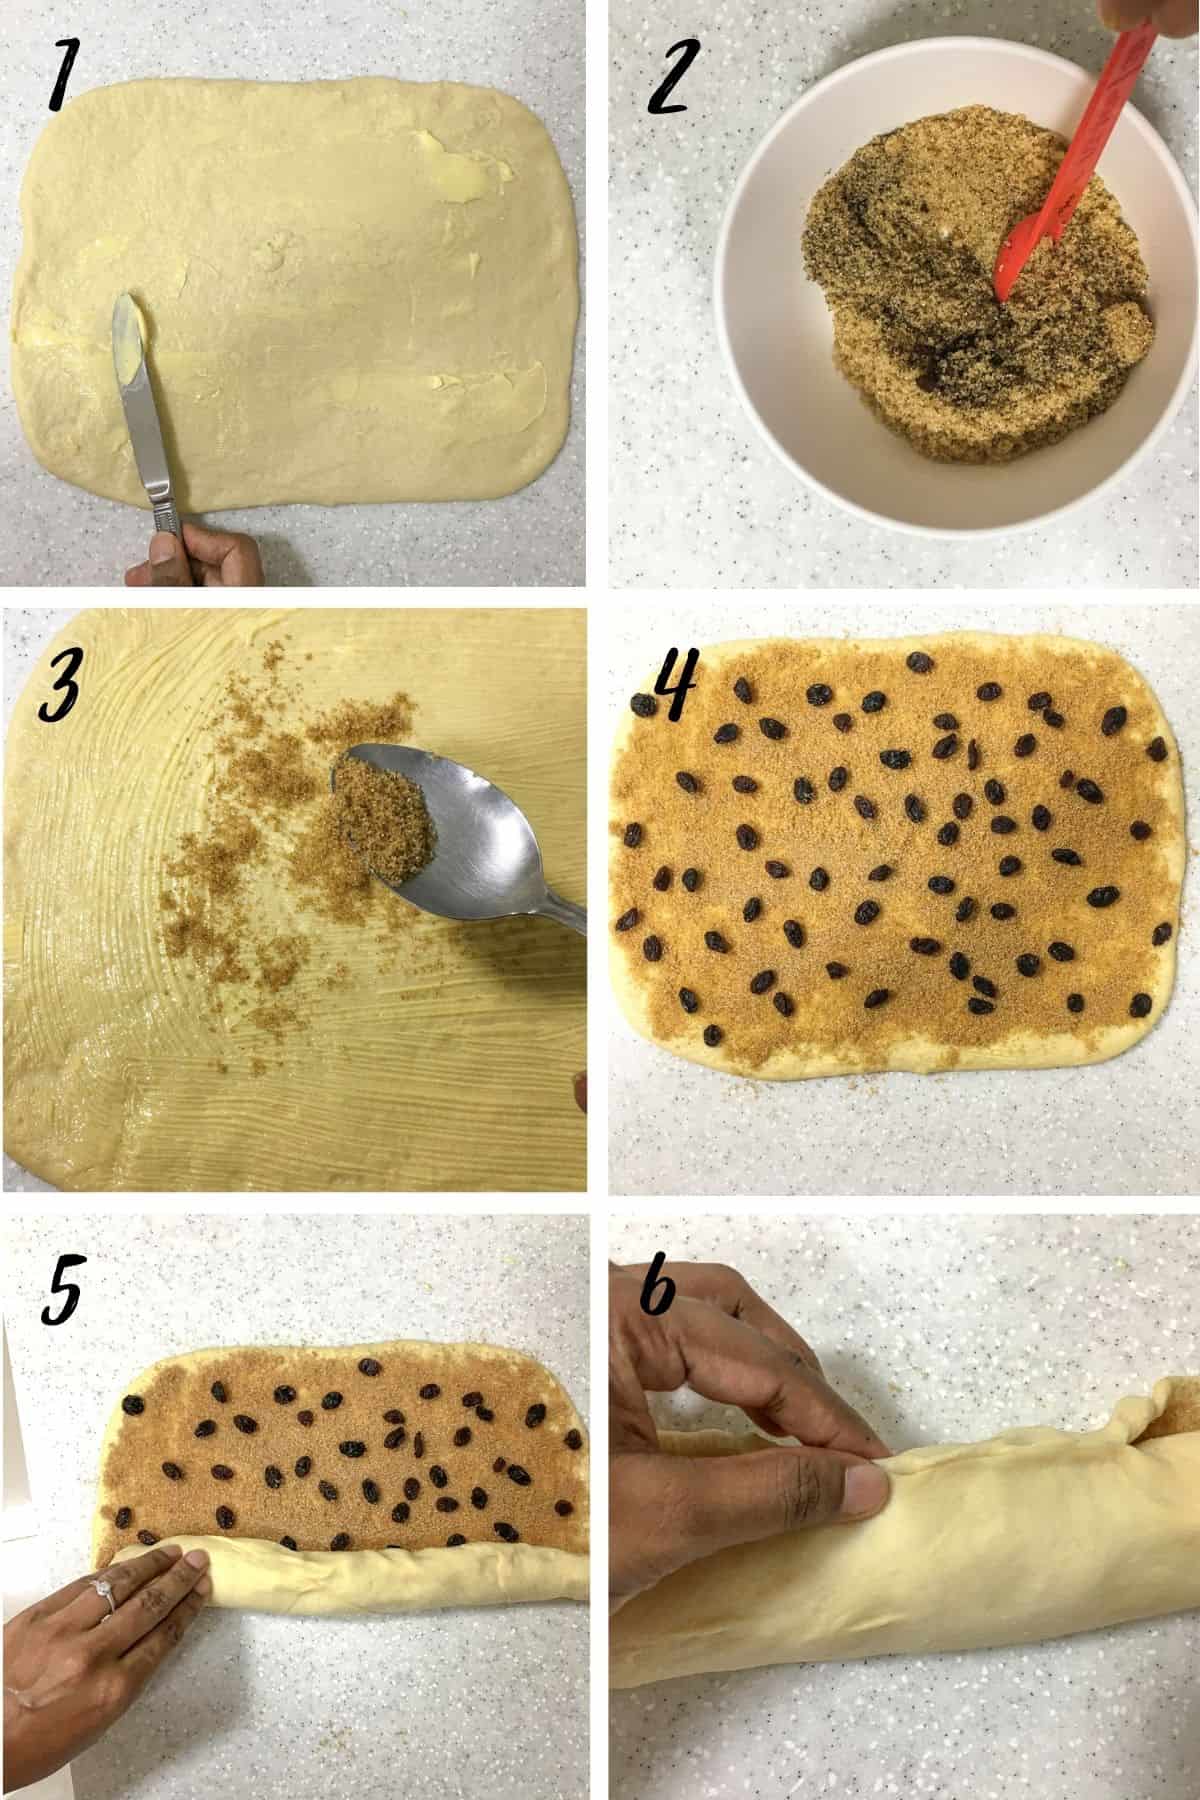 A poster of 6 images showing how to roll the cinnamon raisin rolls dough